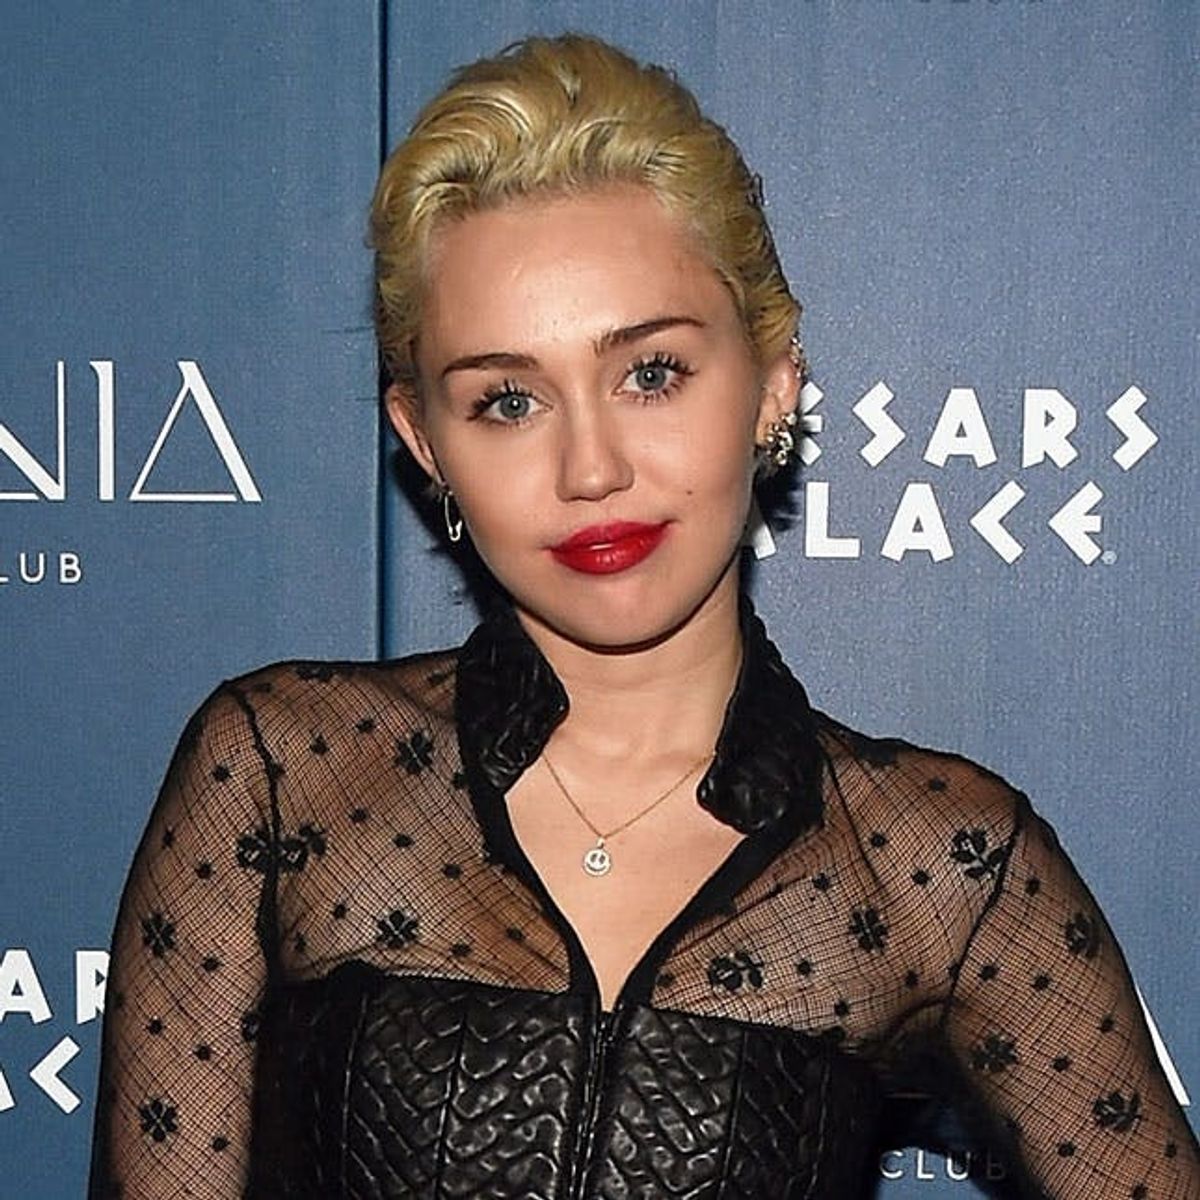 Miley Cyrus Has a Genius Hack for Covering Up Zits